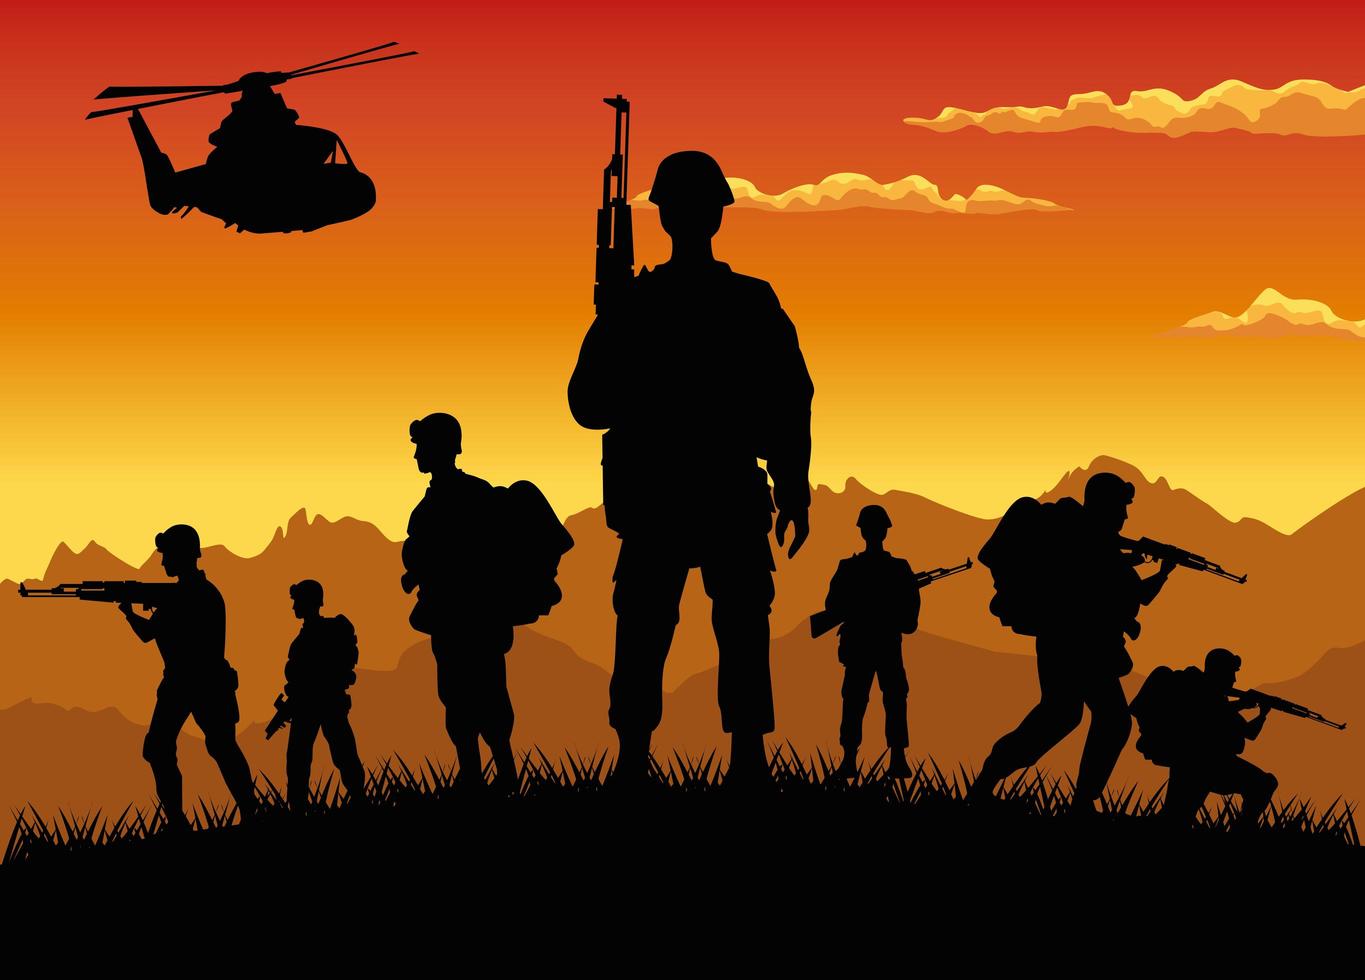 military soldiers with guns and helicopter silhouettes sunset scene vector